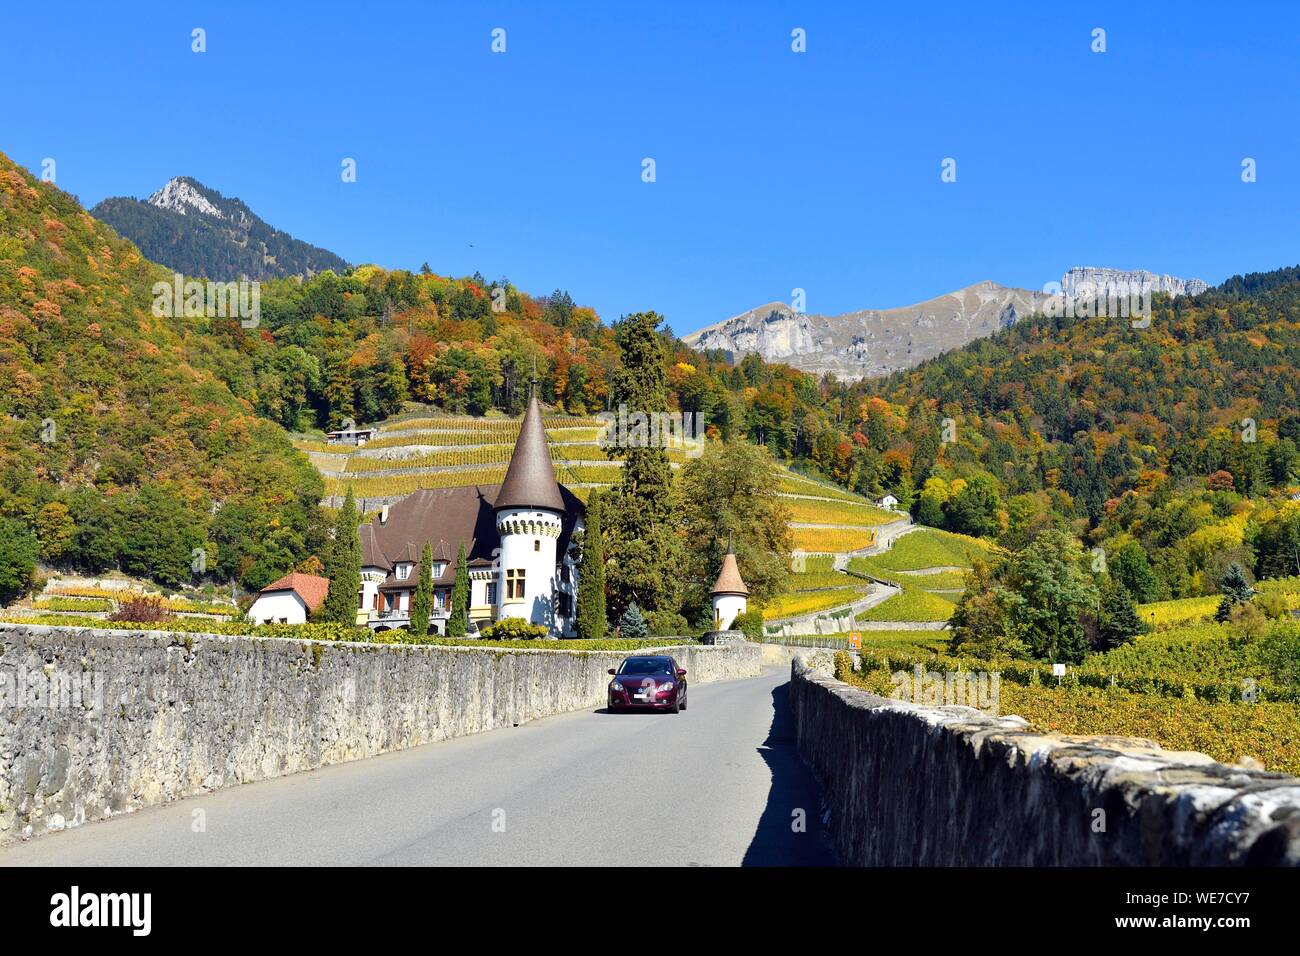 Switzerland, Canton of Vaud, Yvorne, small town surrounded by vineyards Stock Photo